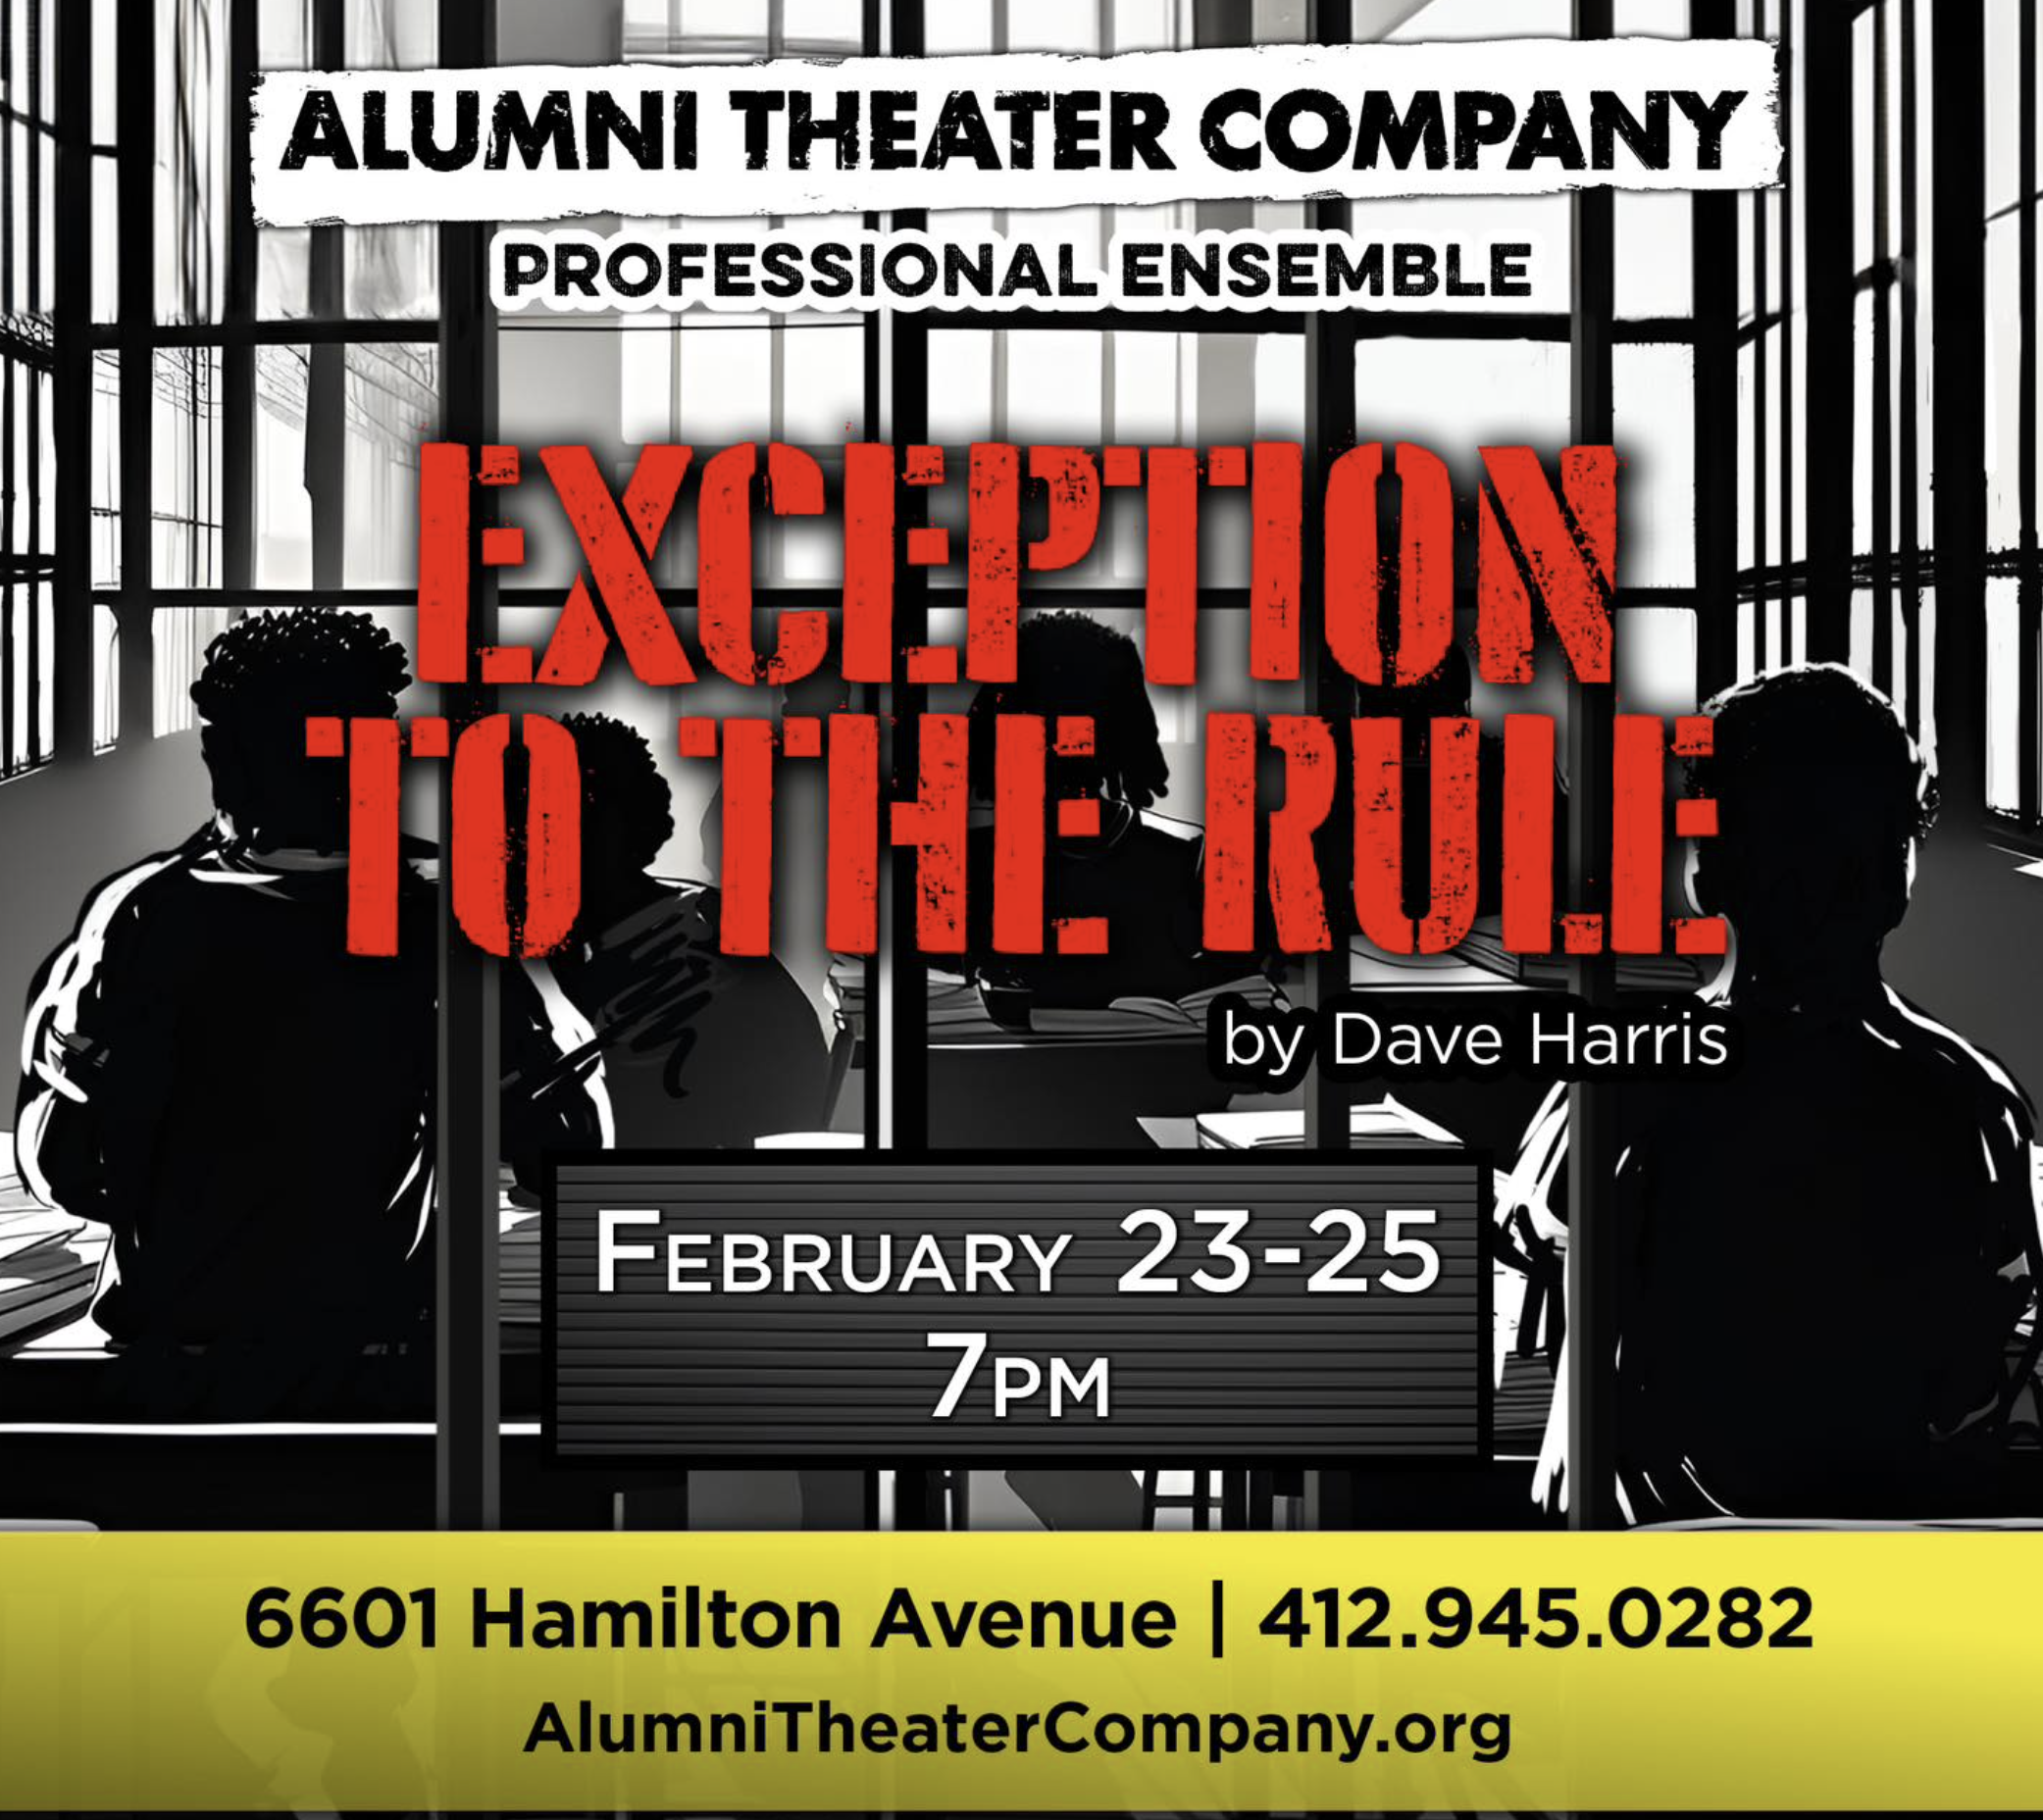 The digital poster for Exception to the Rule by the Alumni Theater Company.